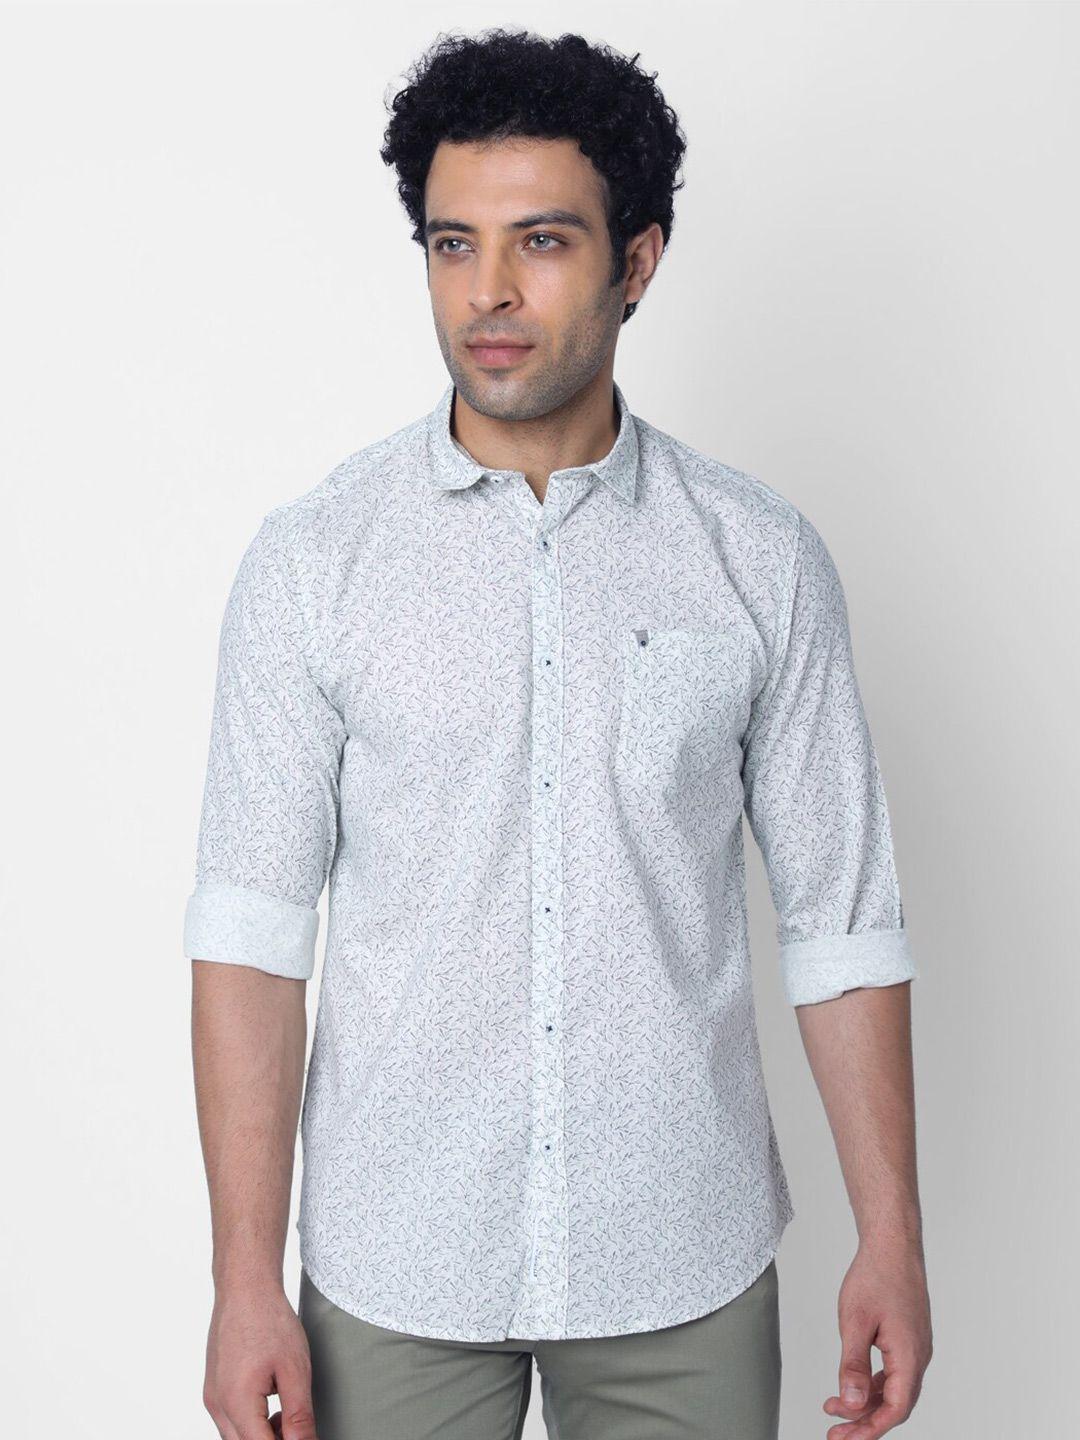 oxemberg-classic-slim-fit-floral-printed-cotton-casual-shirt